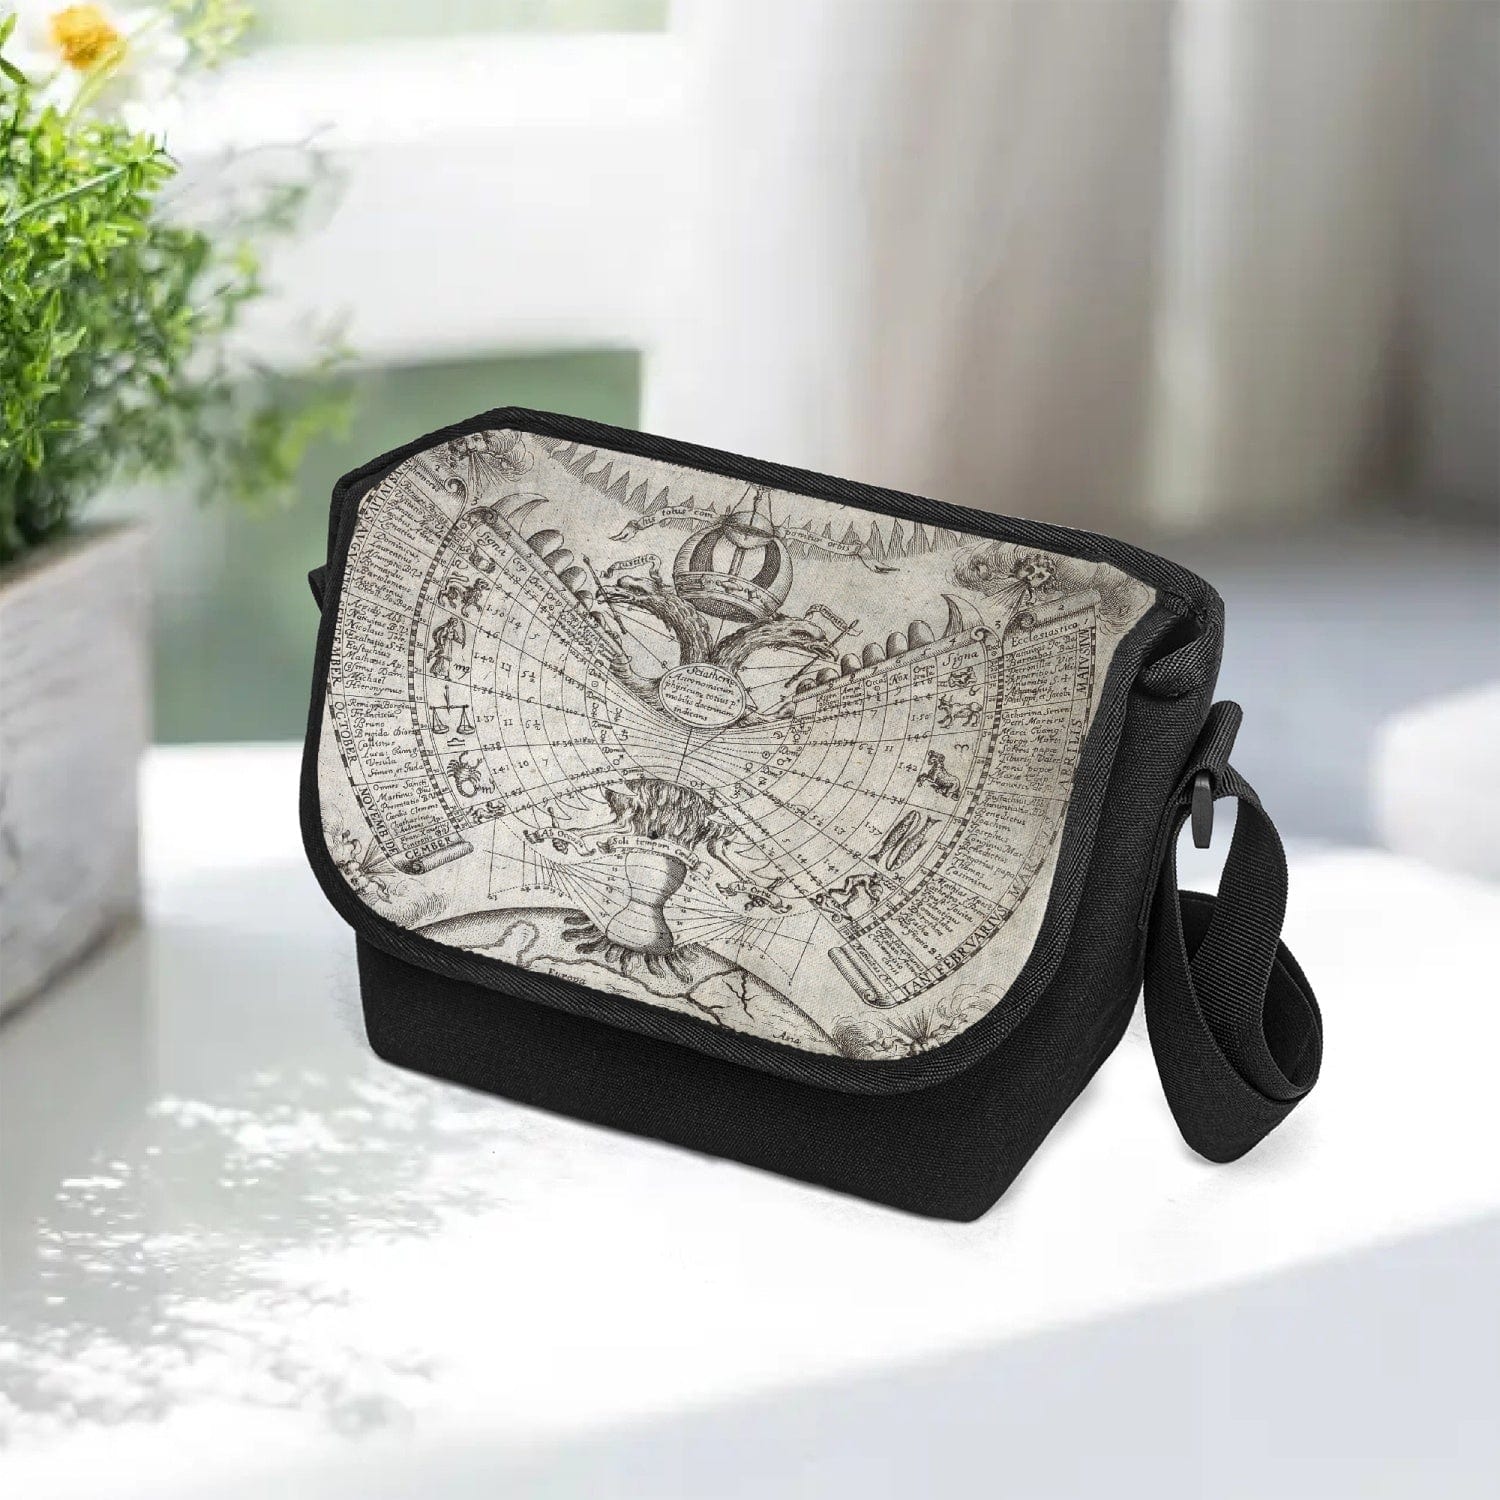 Engraving by P. Miotte dated 1646 is the source of the print on this practical, unisex Messenger bag at Gallery Serpentine 4